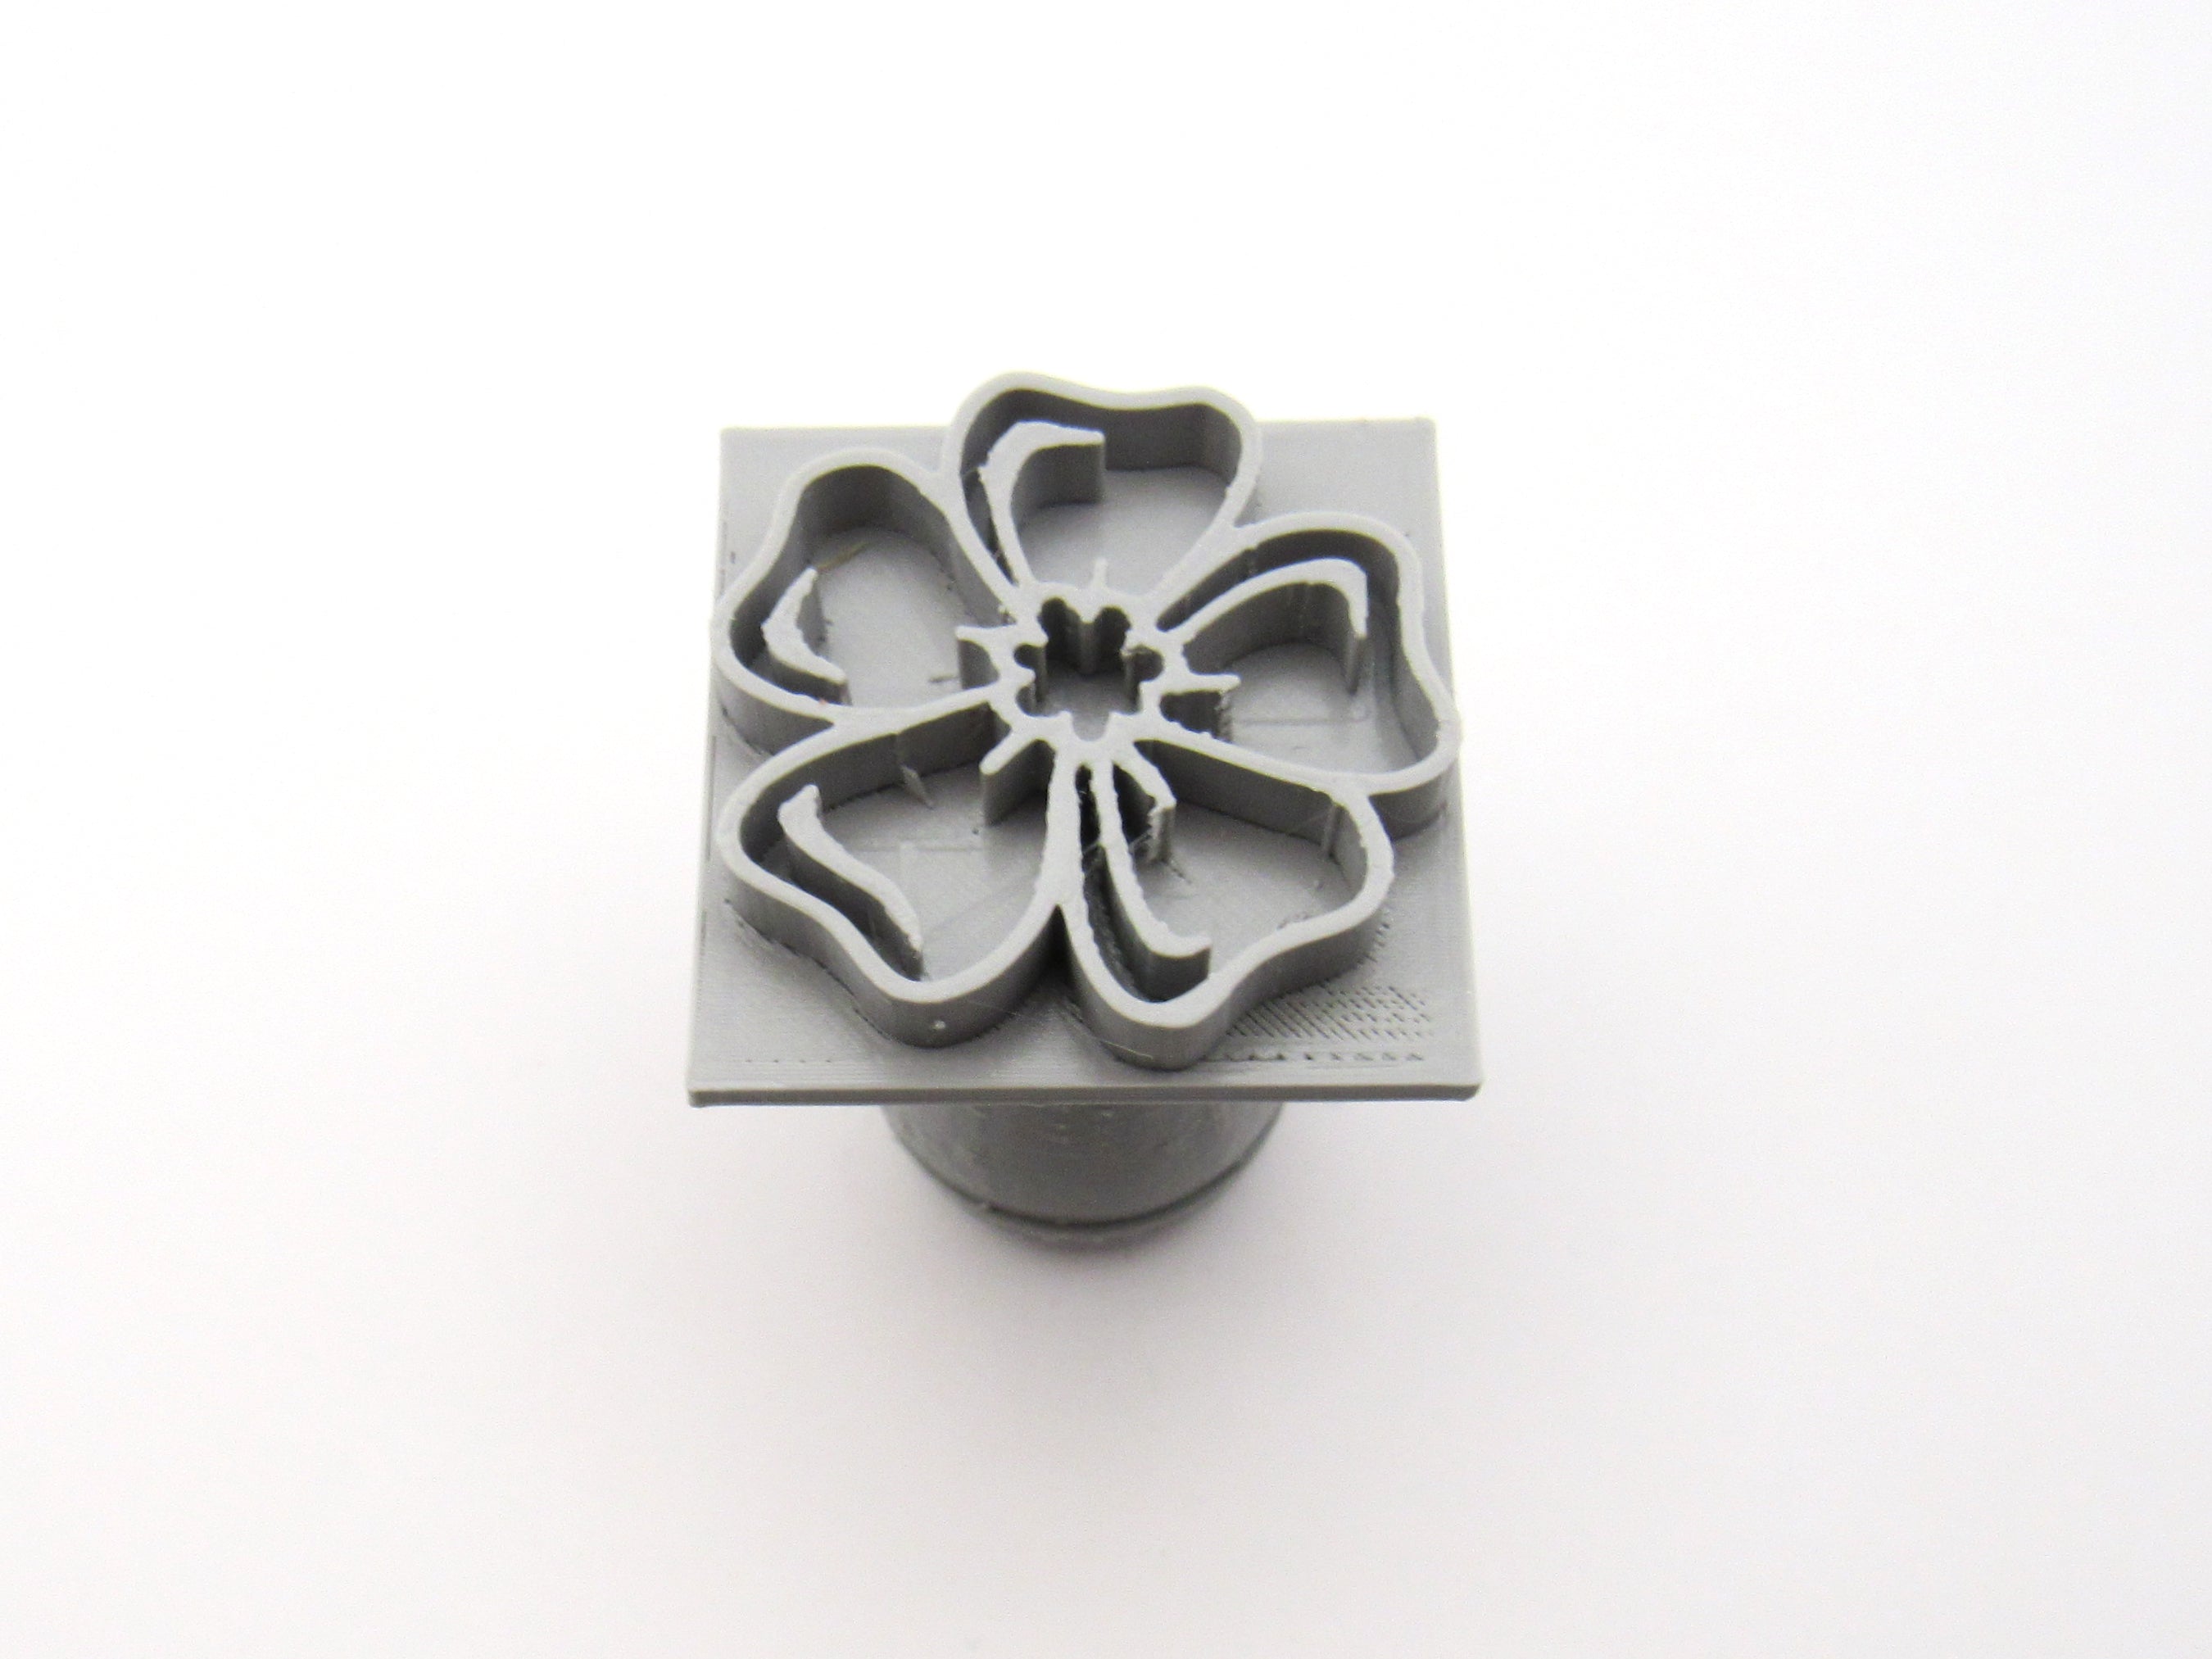 5 Petal Square Clay Stamp with Cutter - Pottery Stamp - Pendant Stamp pendant stamp - A Mayes Pottery